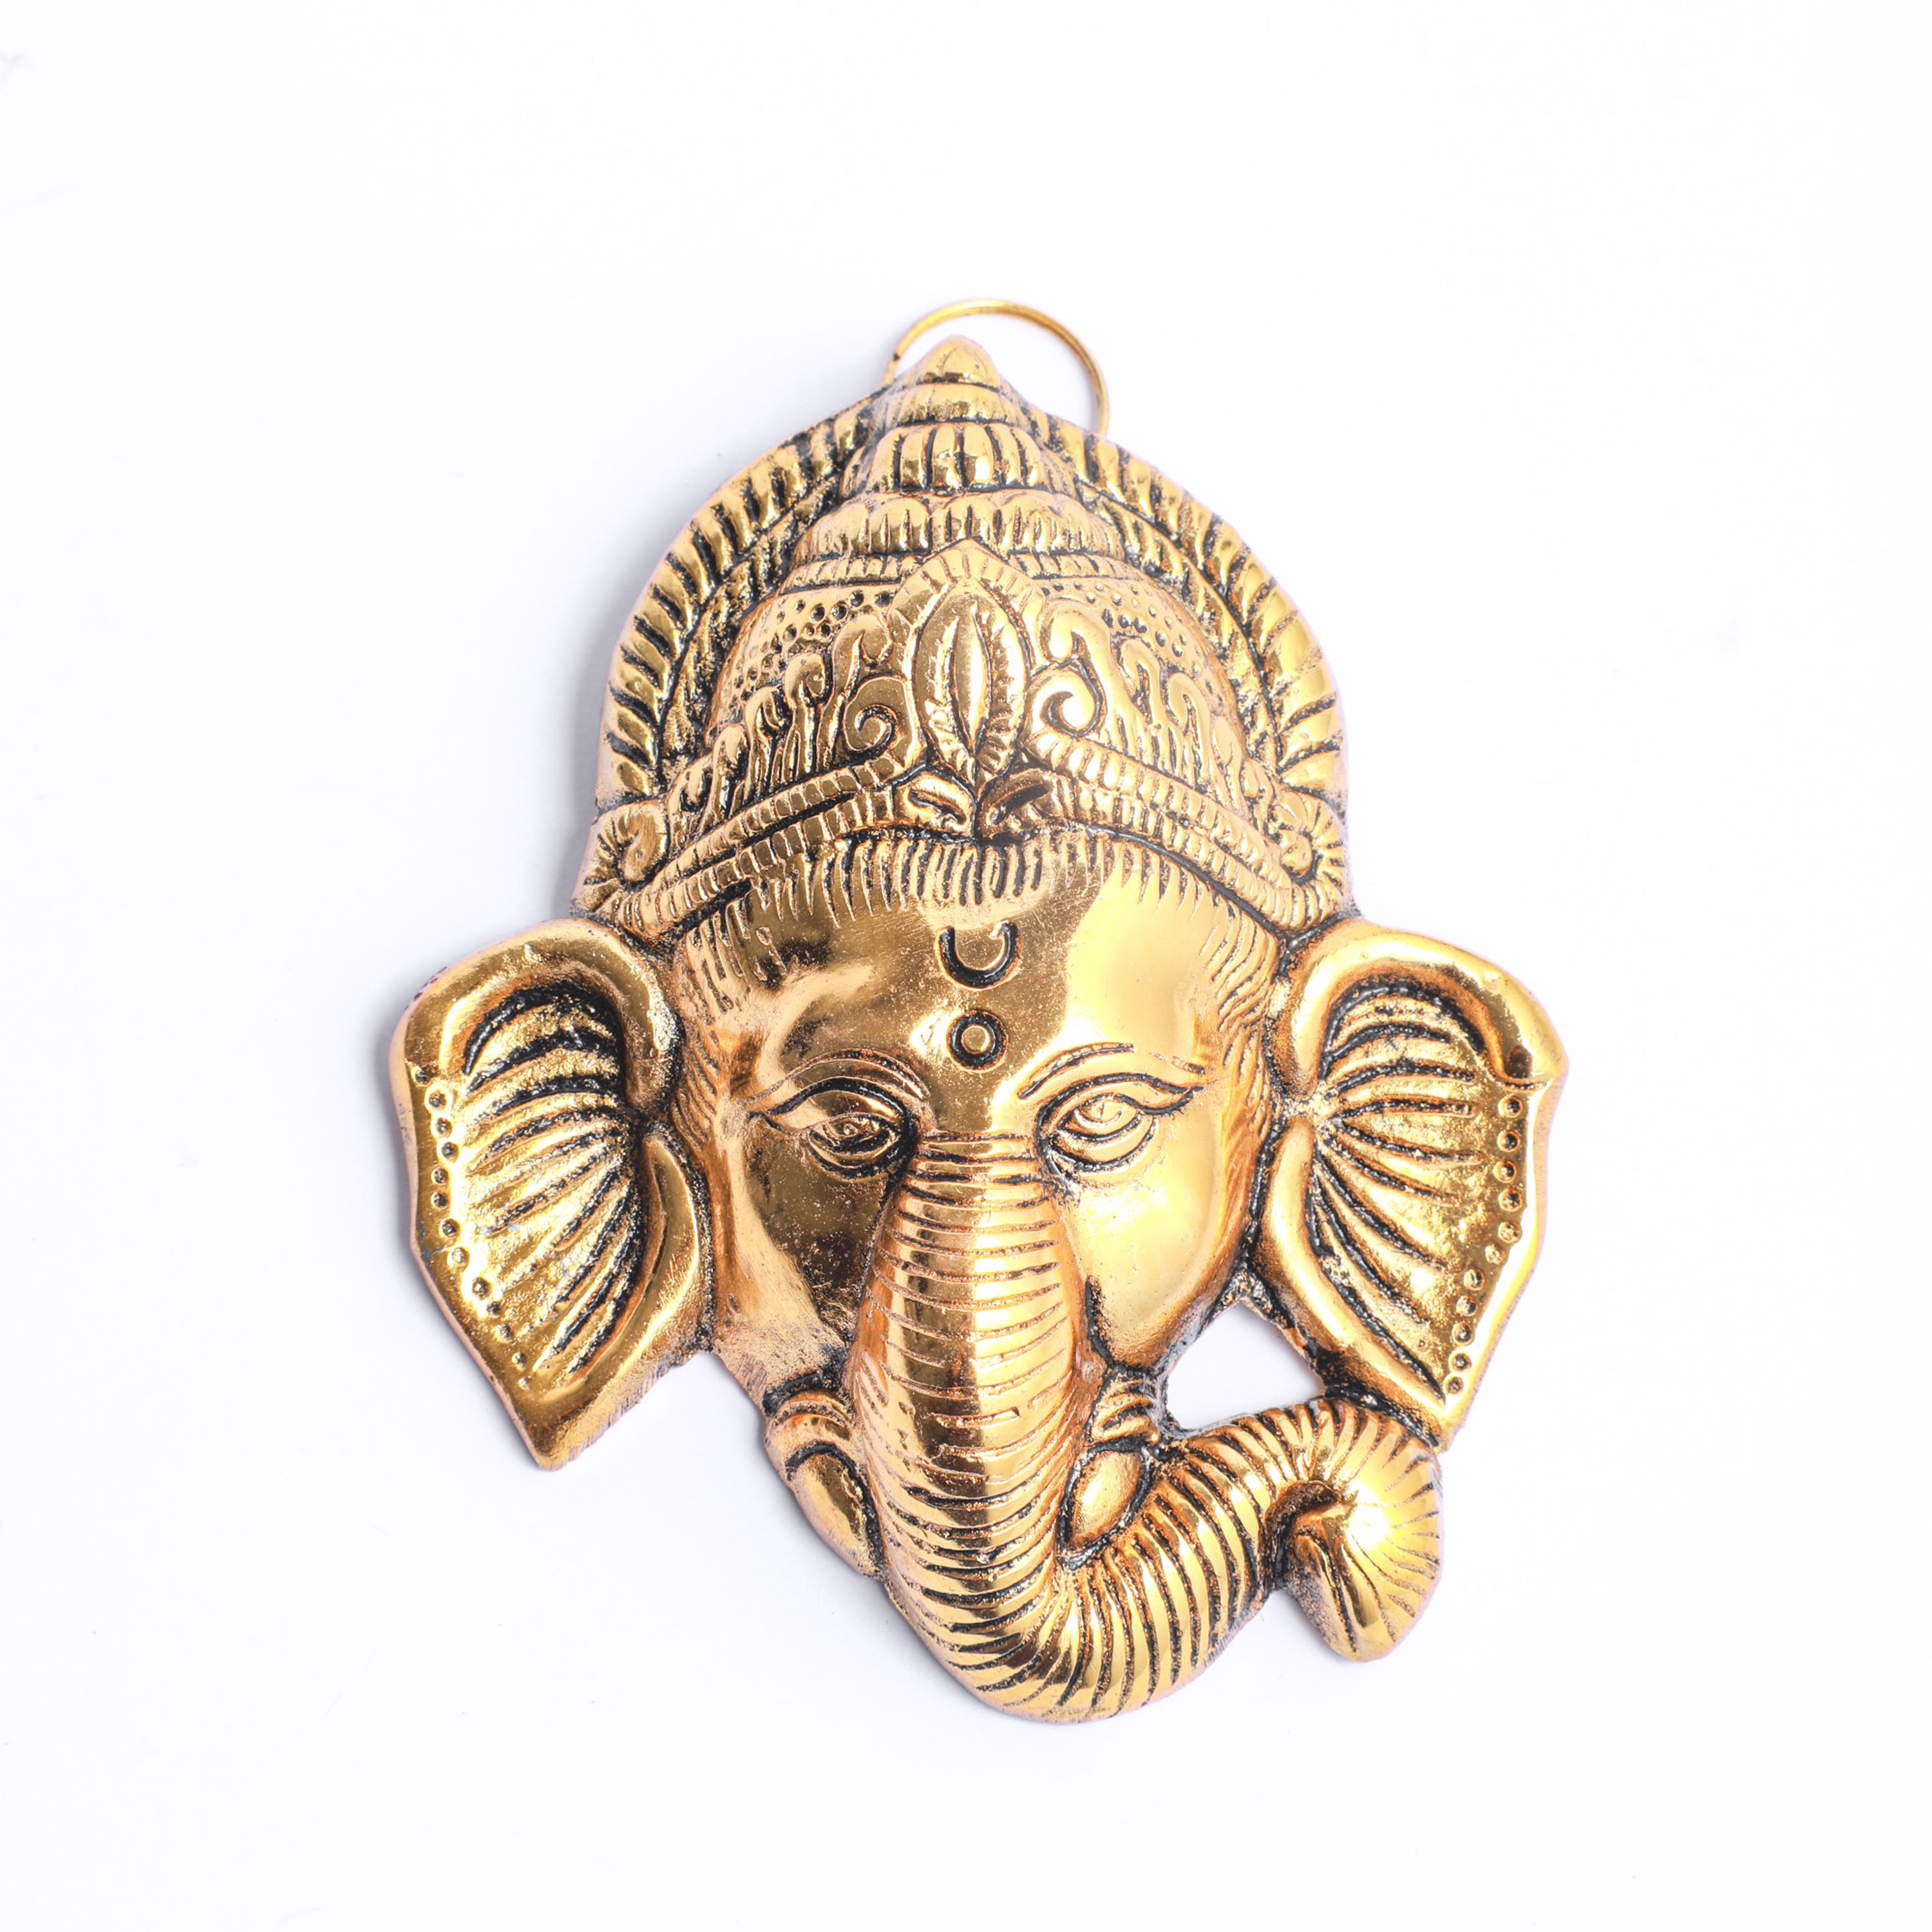 Metal Ganesh Wall hanging for Home/Office Decor in the USA